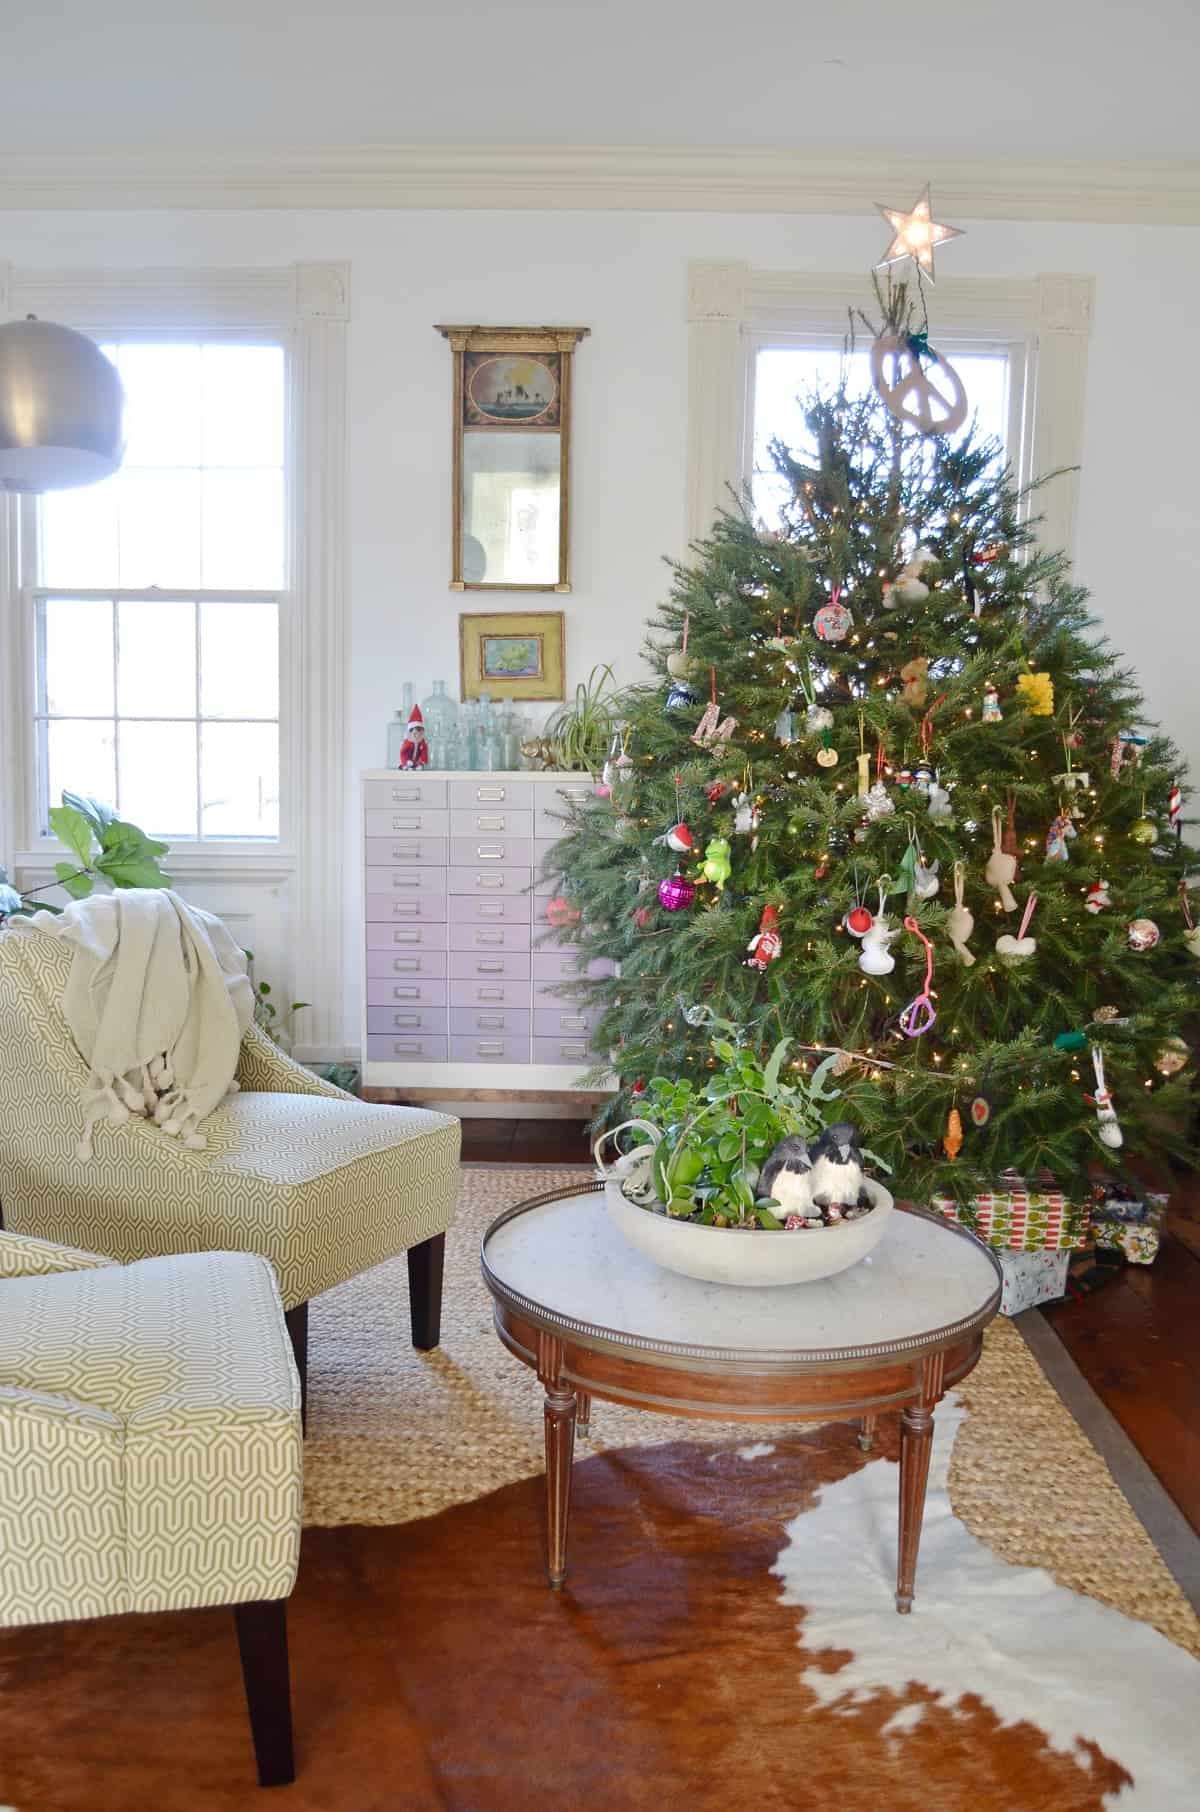 New England holiday house tour with lots of Christmas trees and classic red accents.